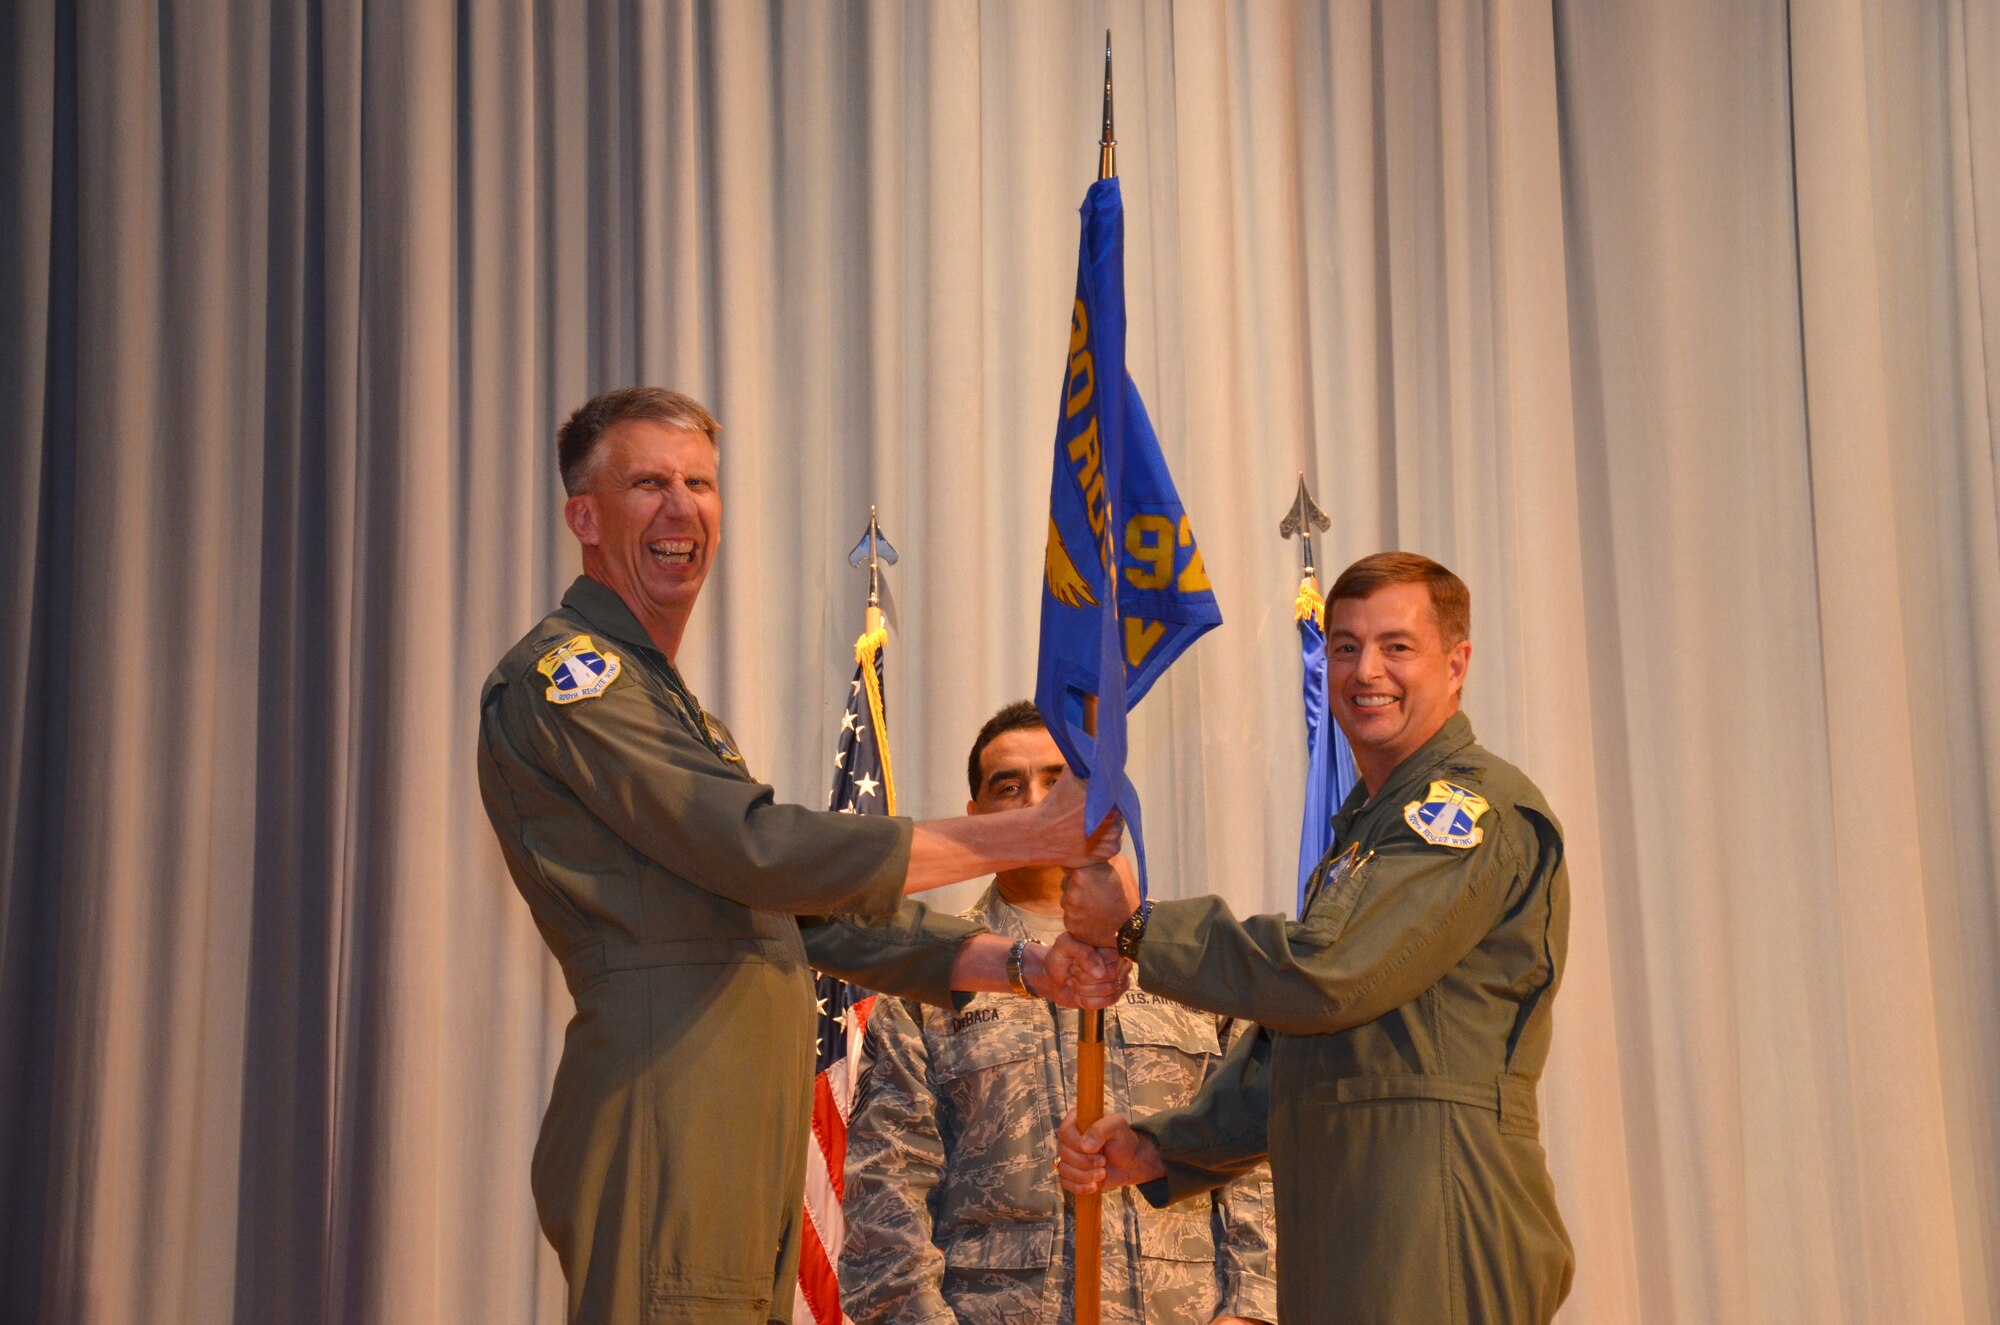 Col. Mark Blalock, right, assumes command as the 920th Rescue Wing Operations Group commander, Patrick Air Force Base, Fla., Jan. 7. Col. Jeffrey Macrander, 920th RQW commander, presided over the ceremony. As the OG commander, Blalock will ensure rescue squadrons are manned, trained and equipped to provide the nation, Joint Chiefs, combatant commanders and Air Combat Command the finest combat search and rescue forces any place, any time. (U.S. Air Force photo/Senior Airman Natasha Dowridge)